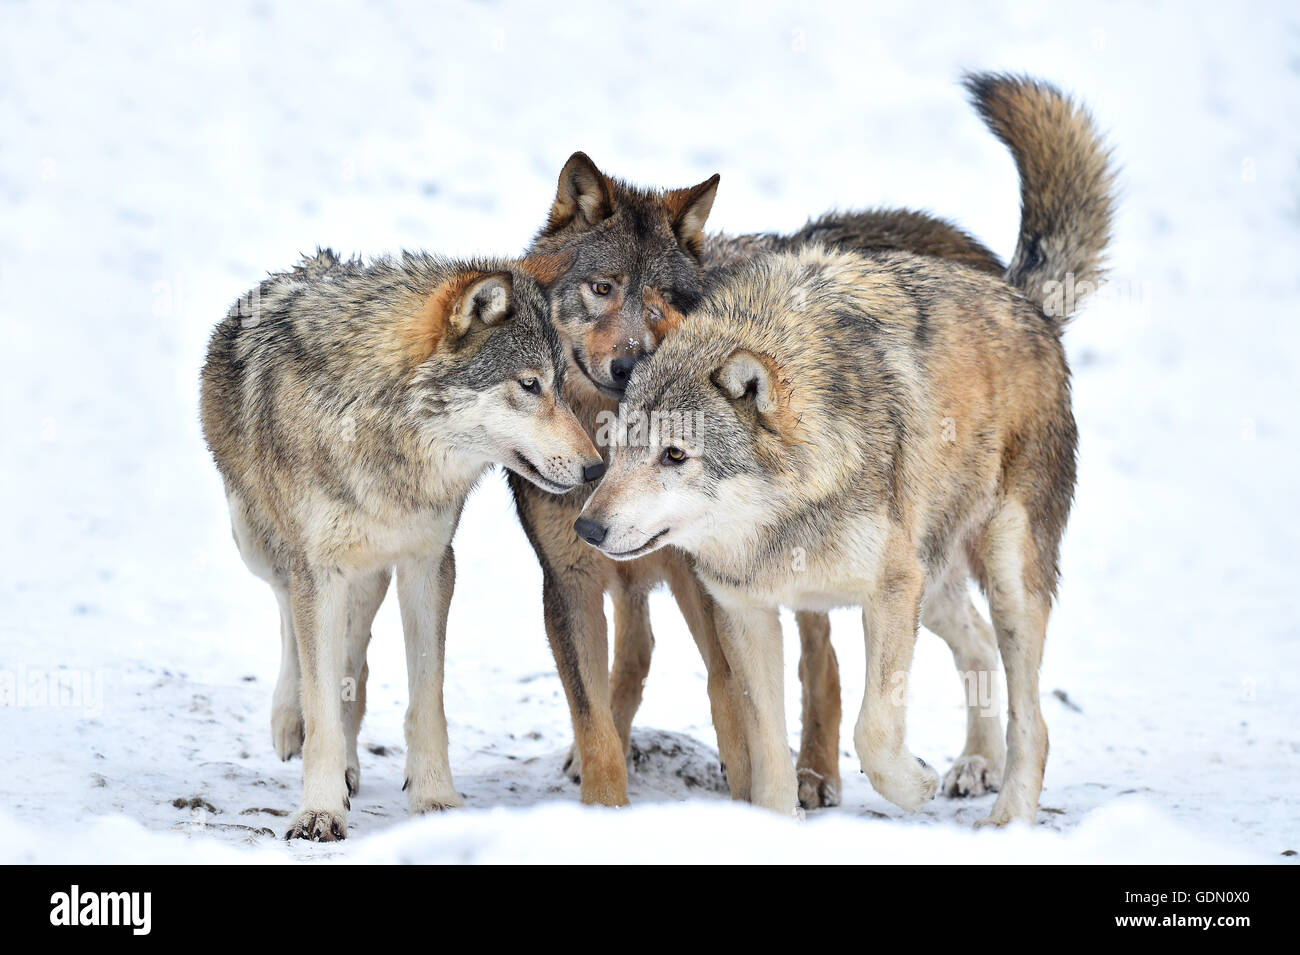 One-year old Eastern Wolf, Eastern timber wolf (Canis lupus lycaon), Young wolves playing in winter, Baden-Württemberg, Germany Stock Photo